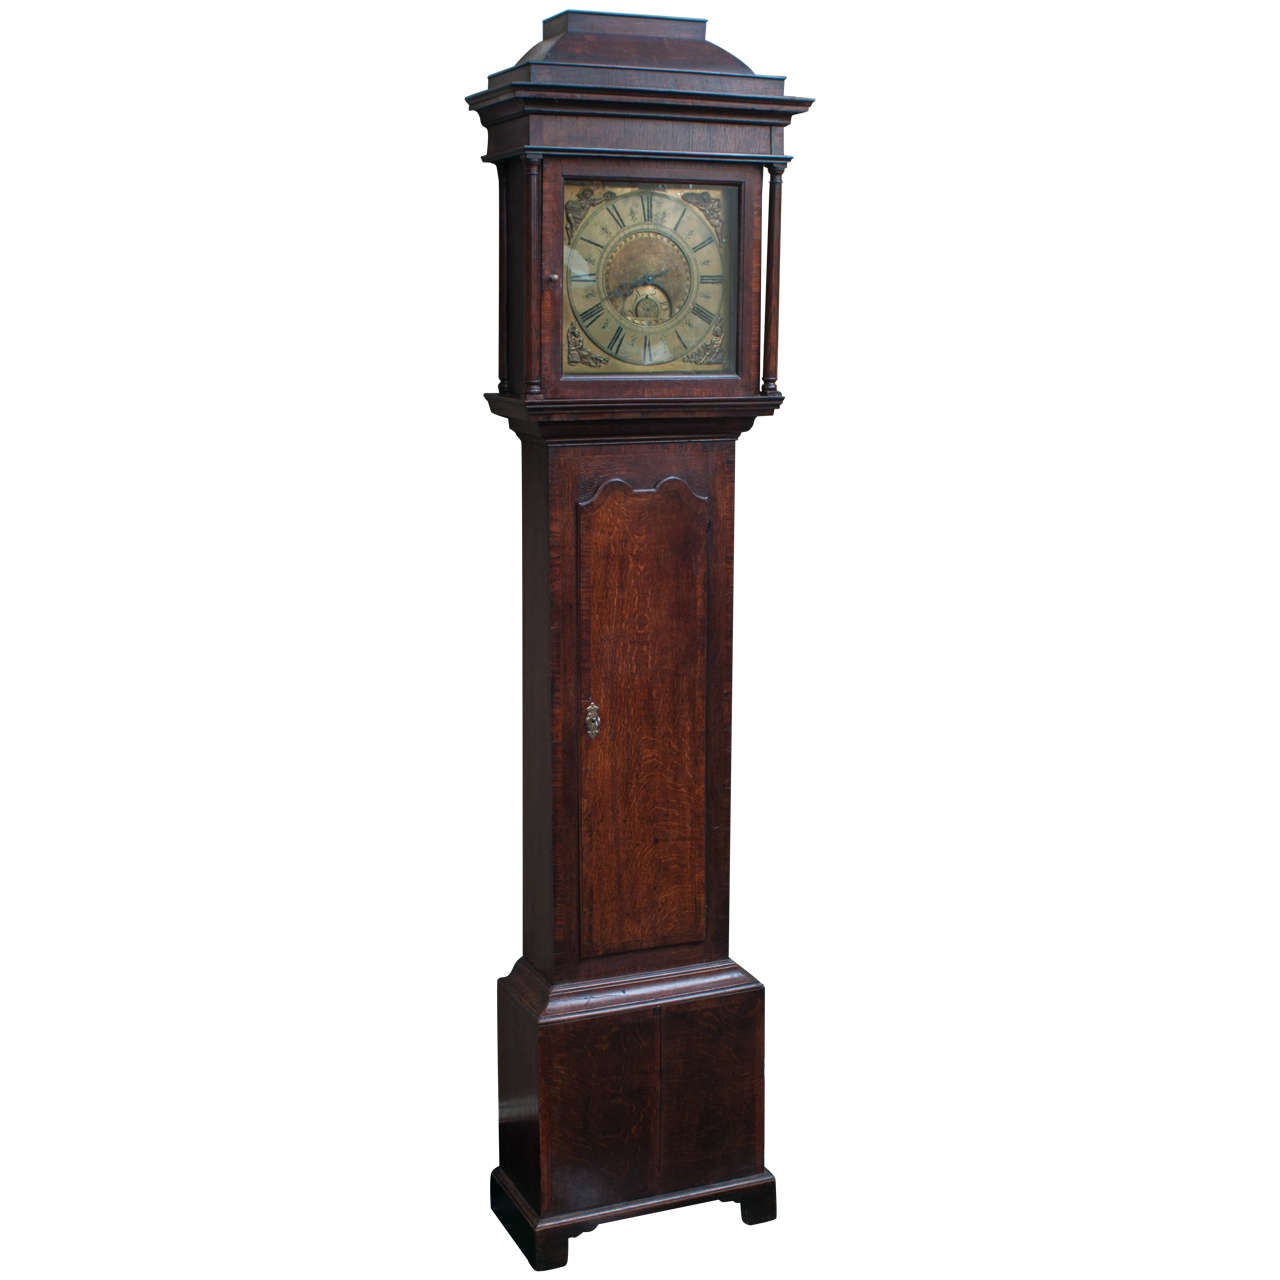 Early English One-Handed Tall Case Clock (Grandfather)